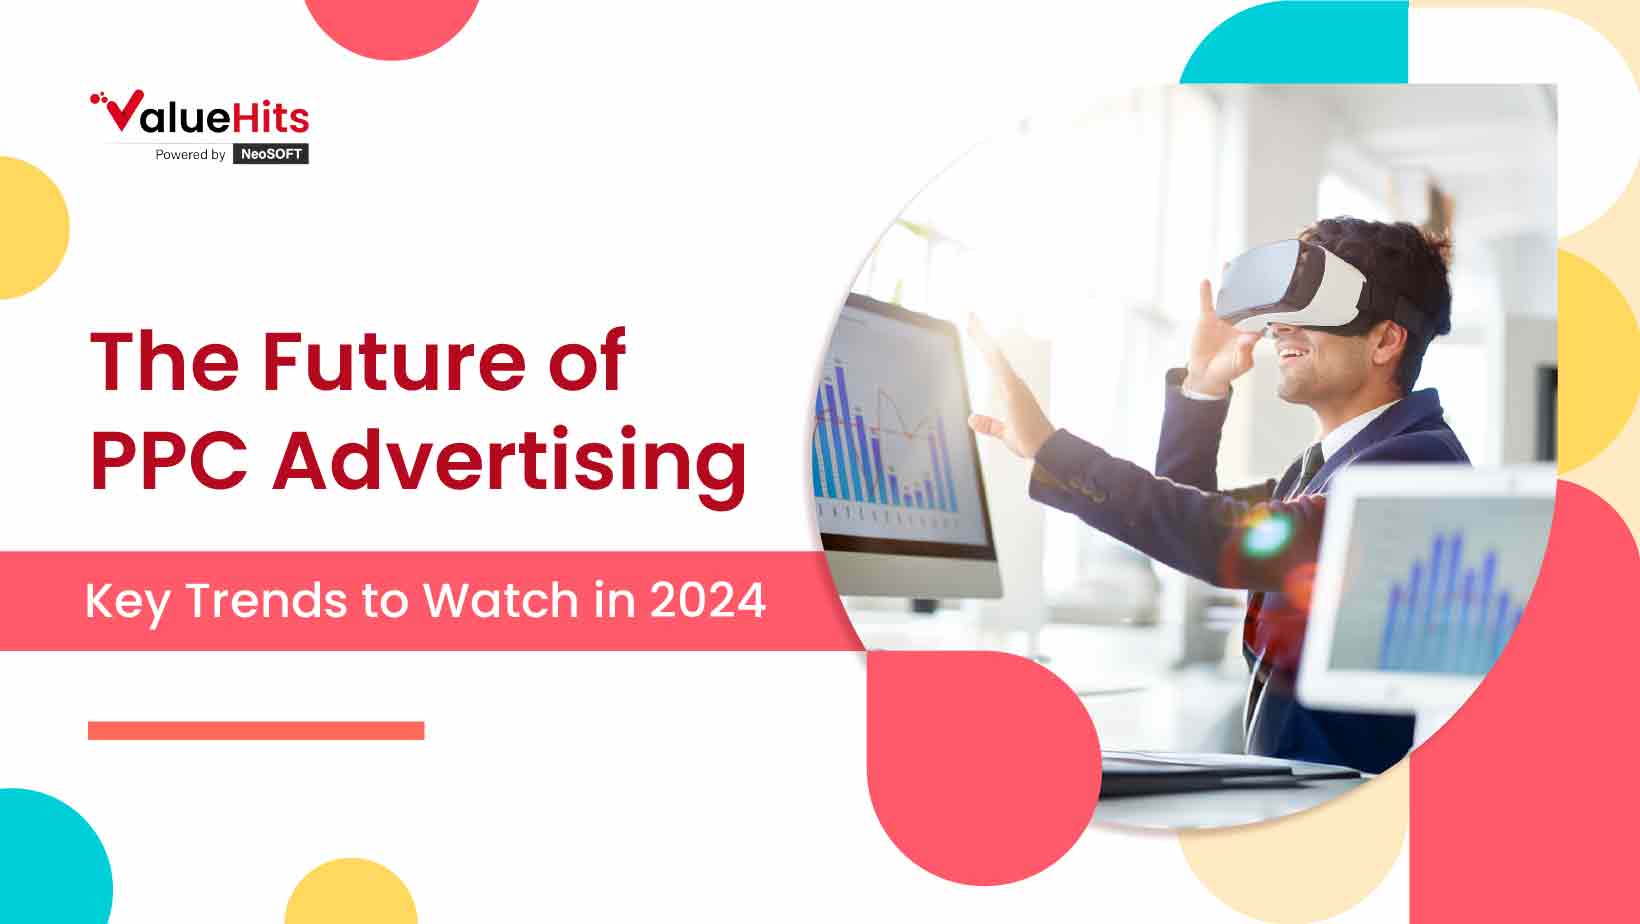 The Future of PPC Advertising: Key Trends to Watch in 2024